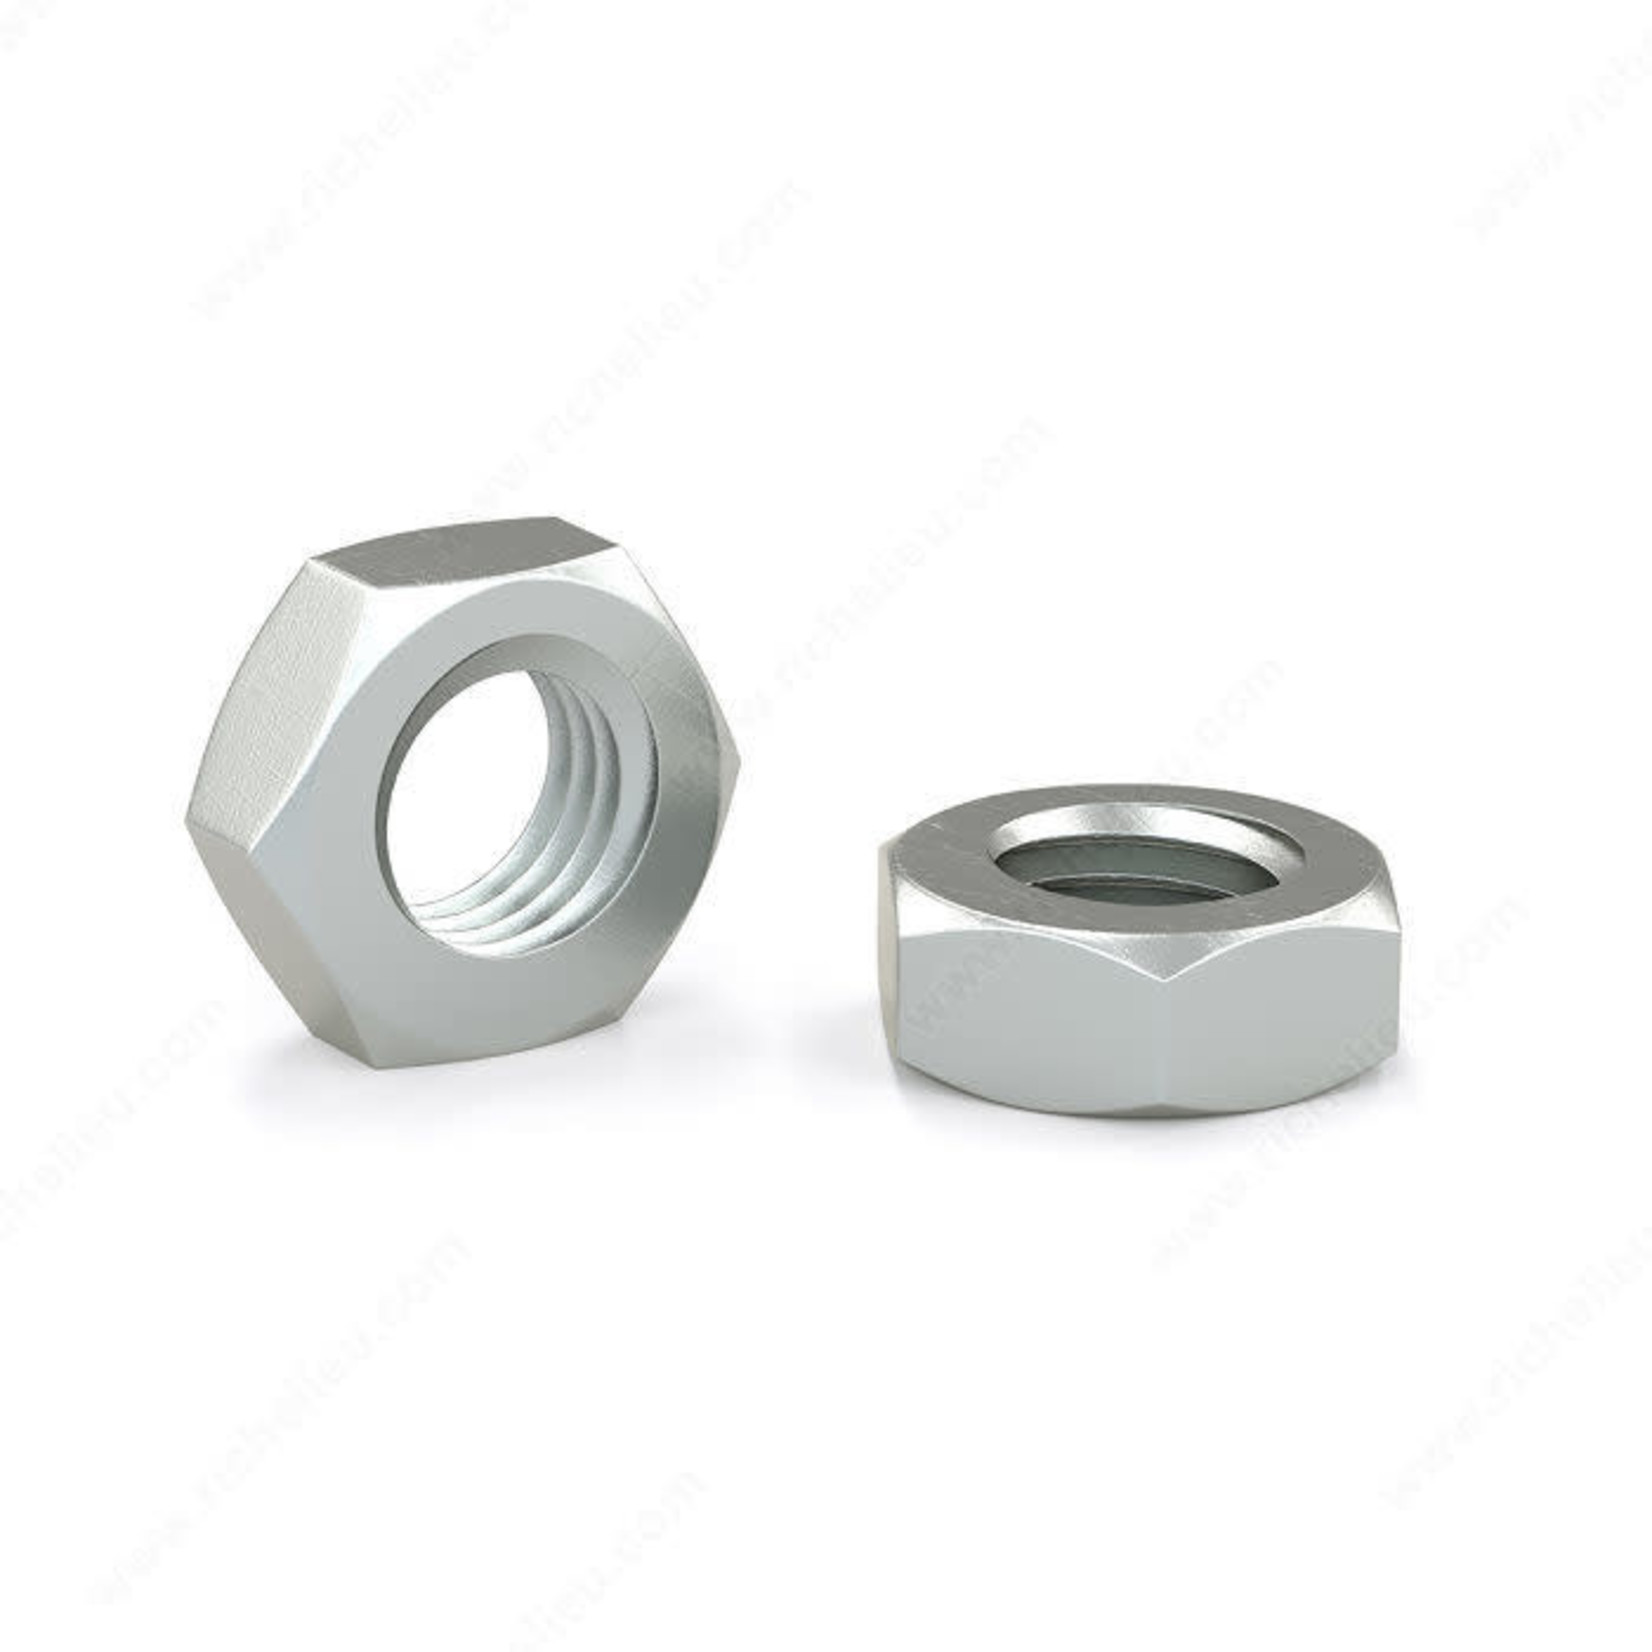 RELIABLE HEX NUT 6-32, 100PK